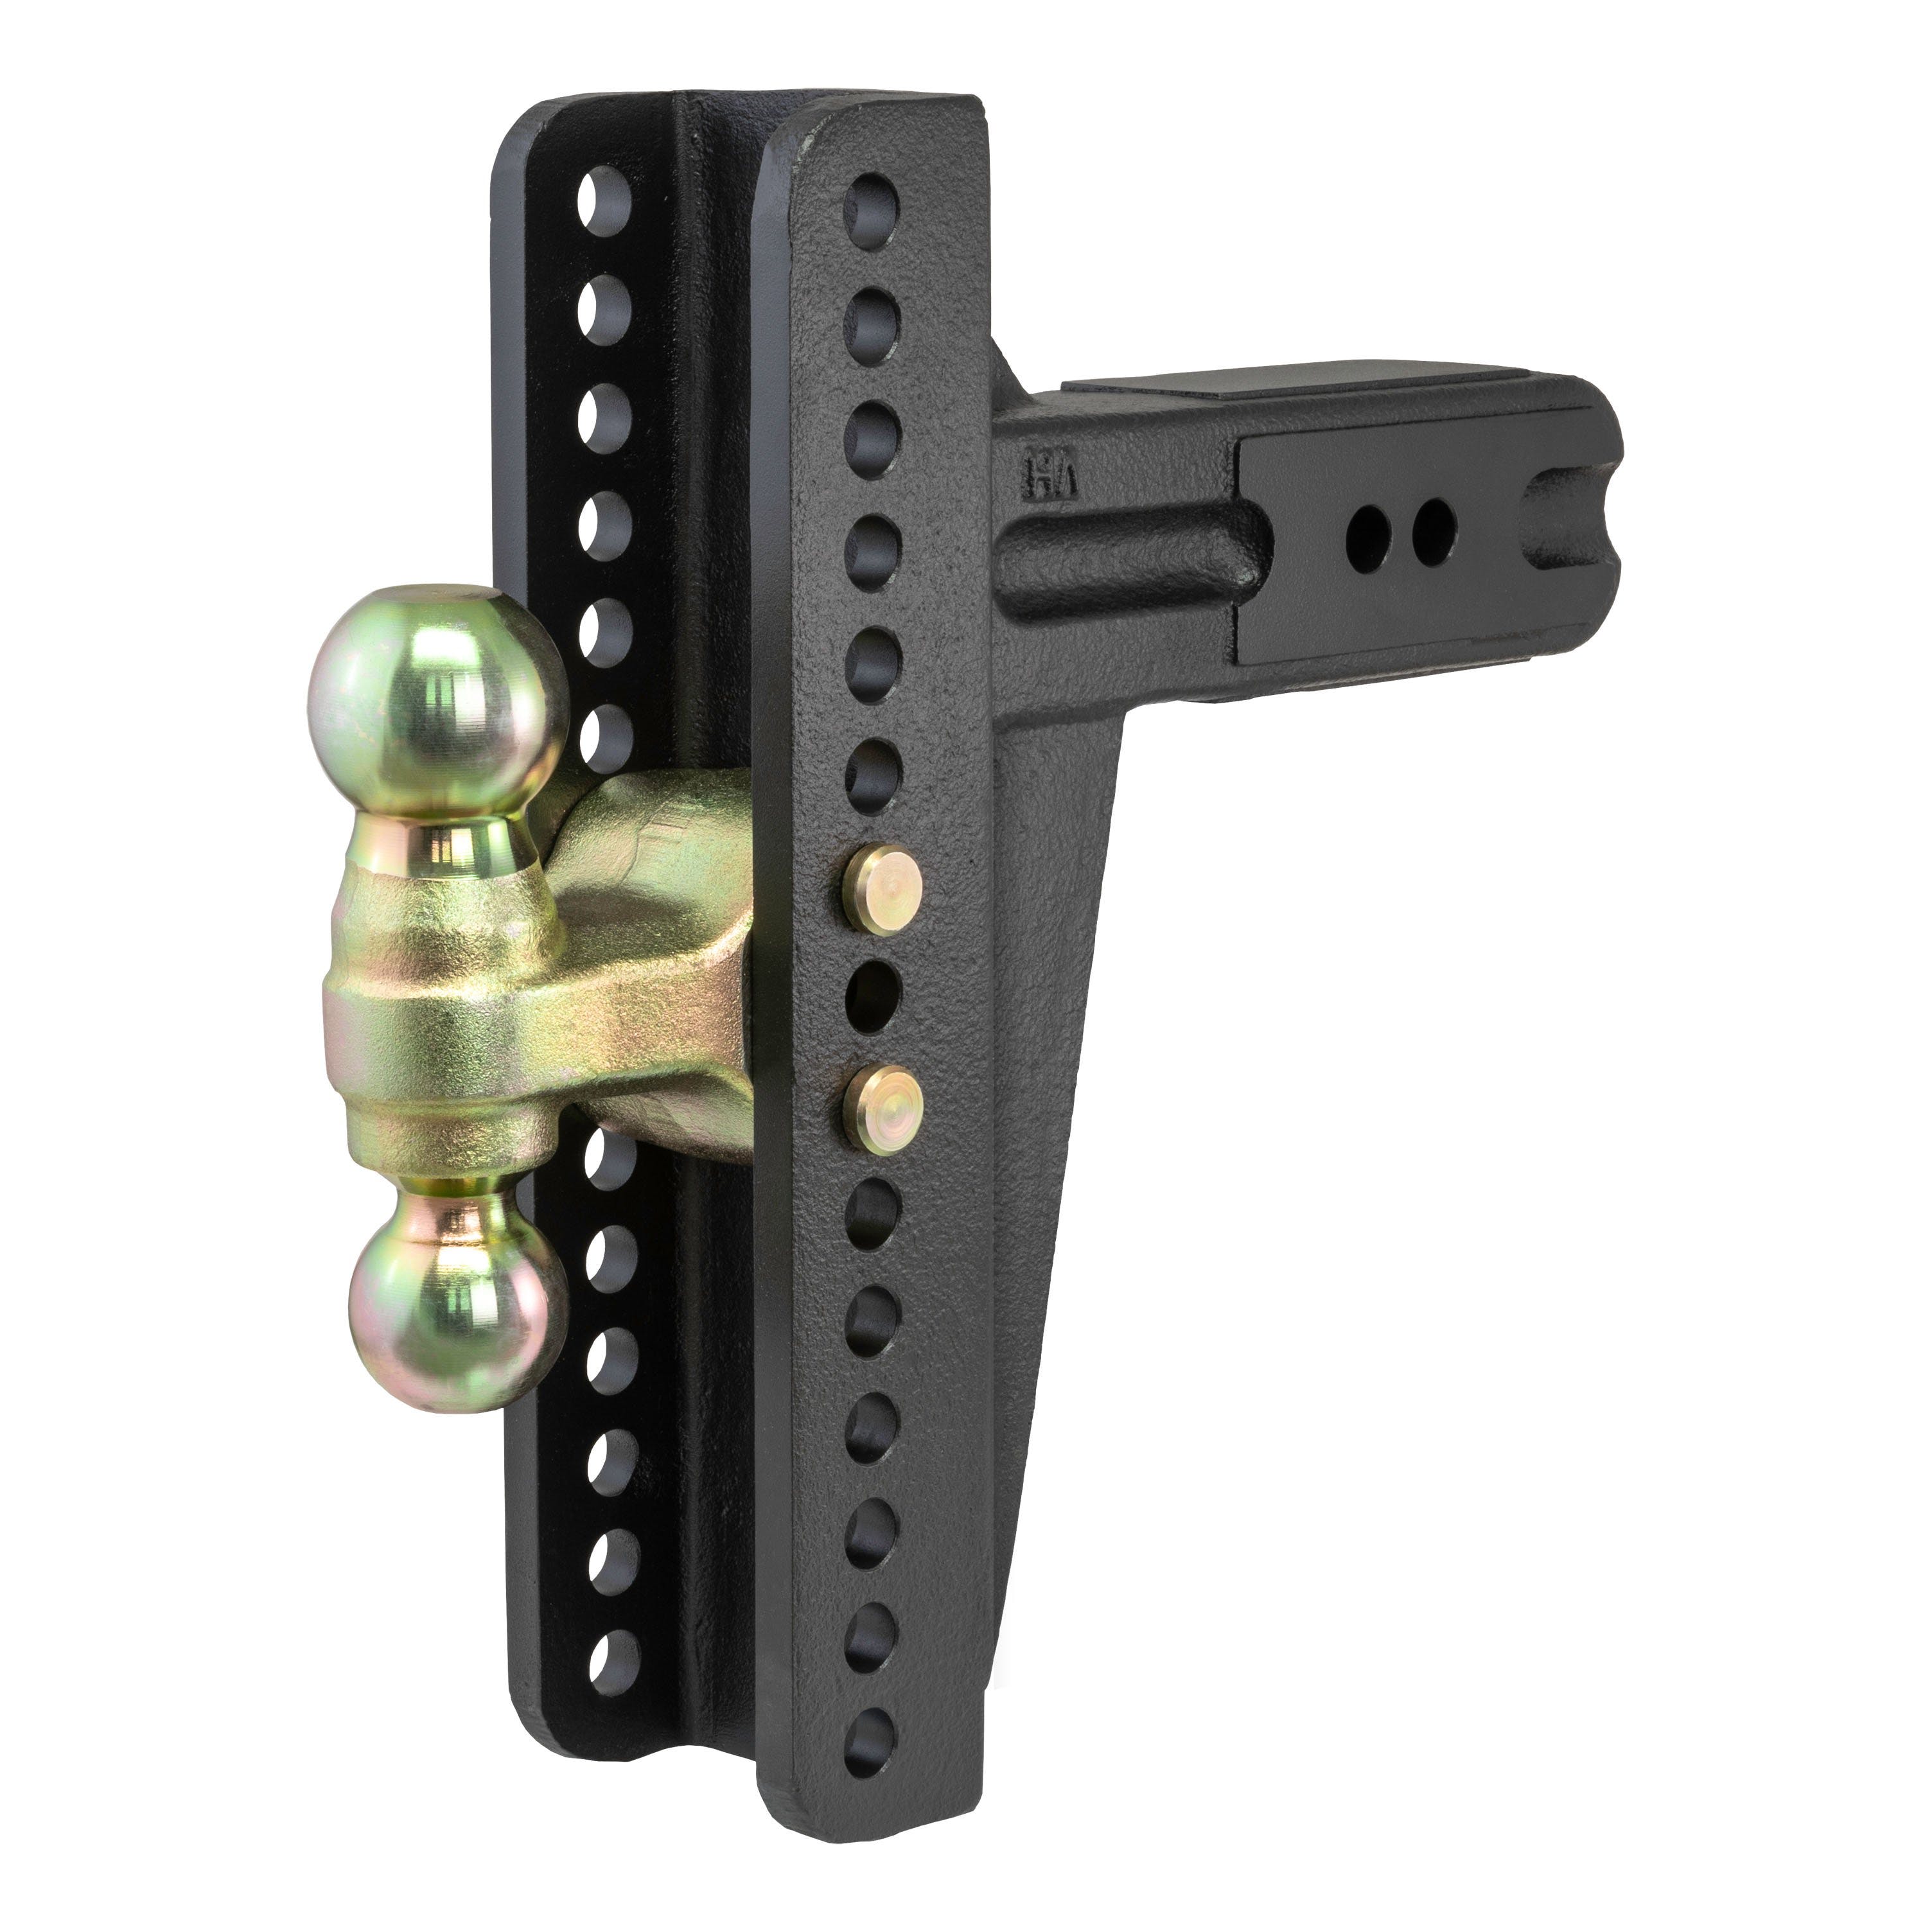 CURT 45928 Adjustable Channel Mount with Dual Ball (3 Shank, 21,000 lbs., 10-5/8 Drop)